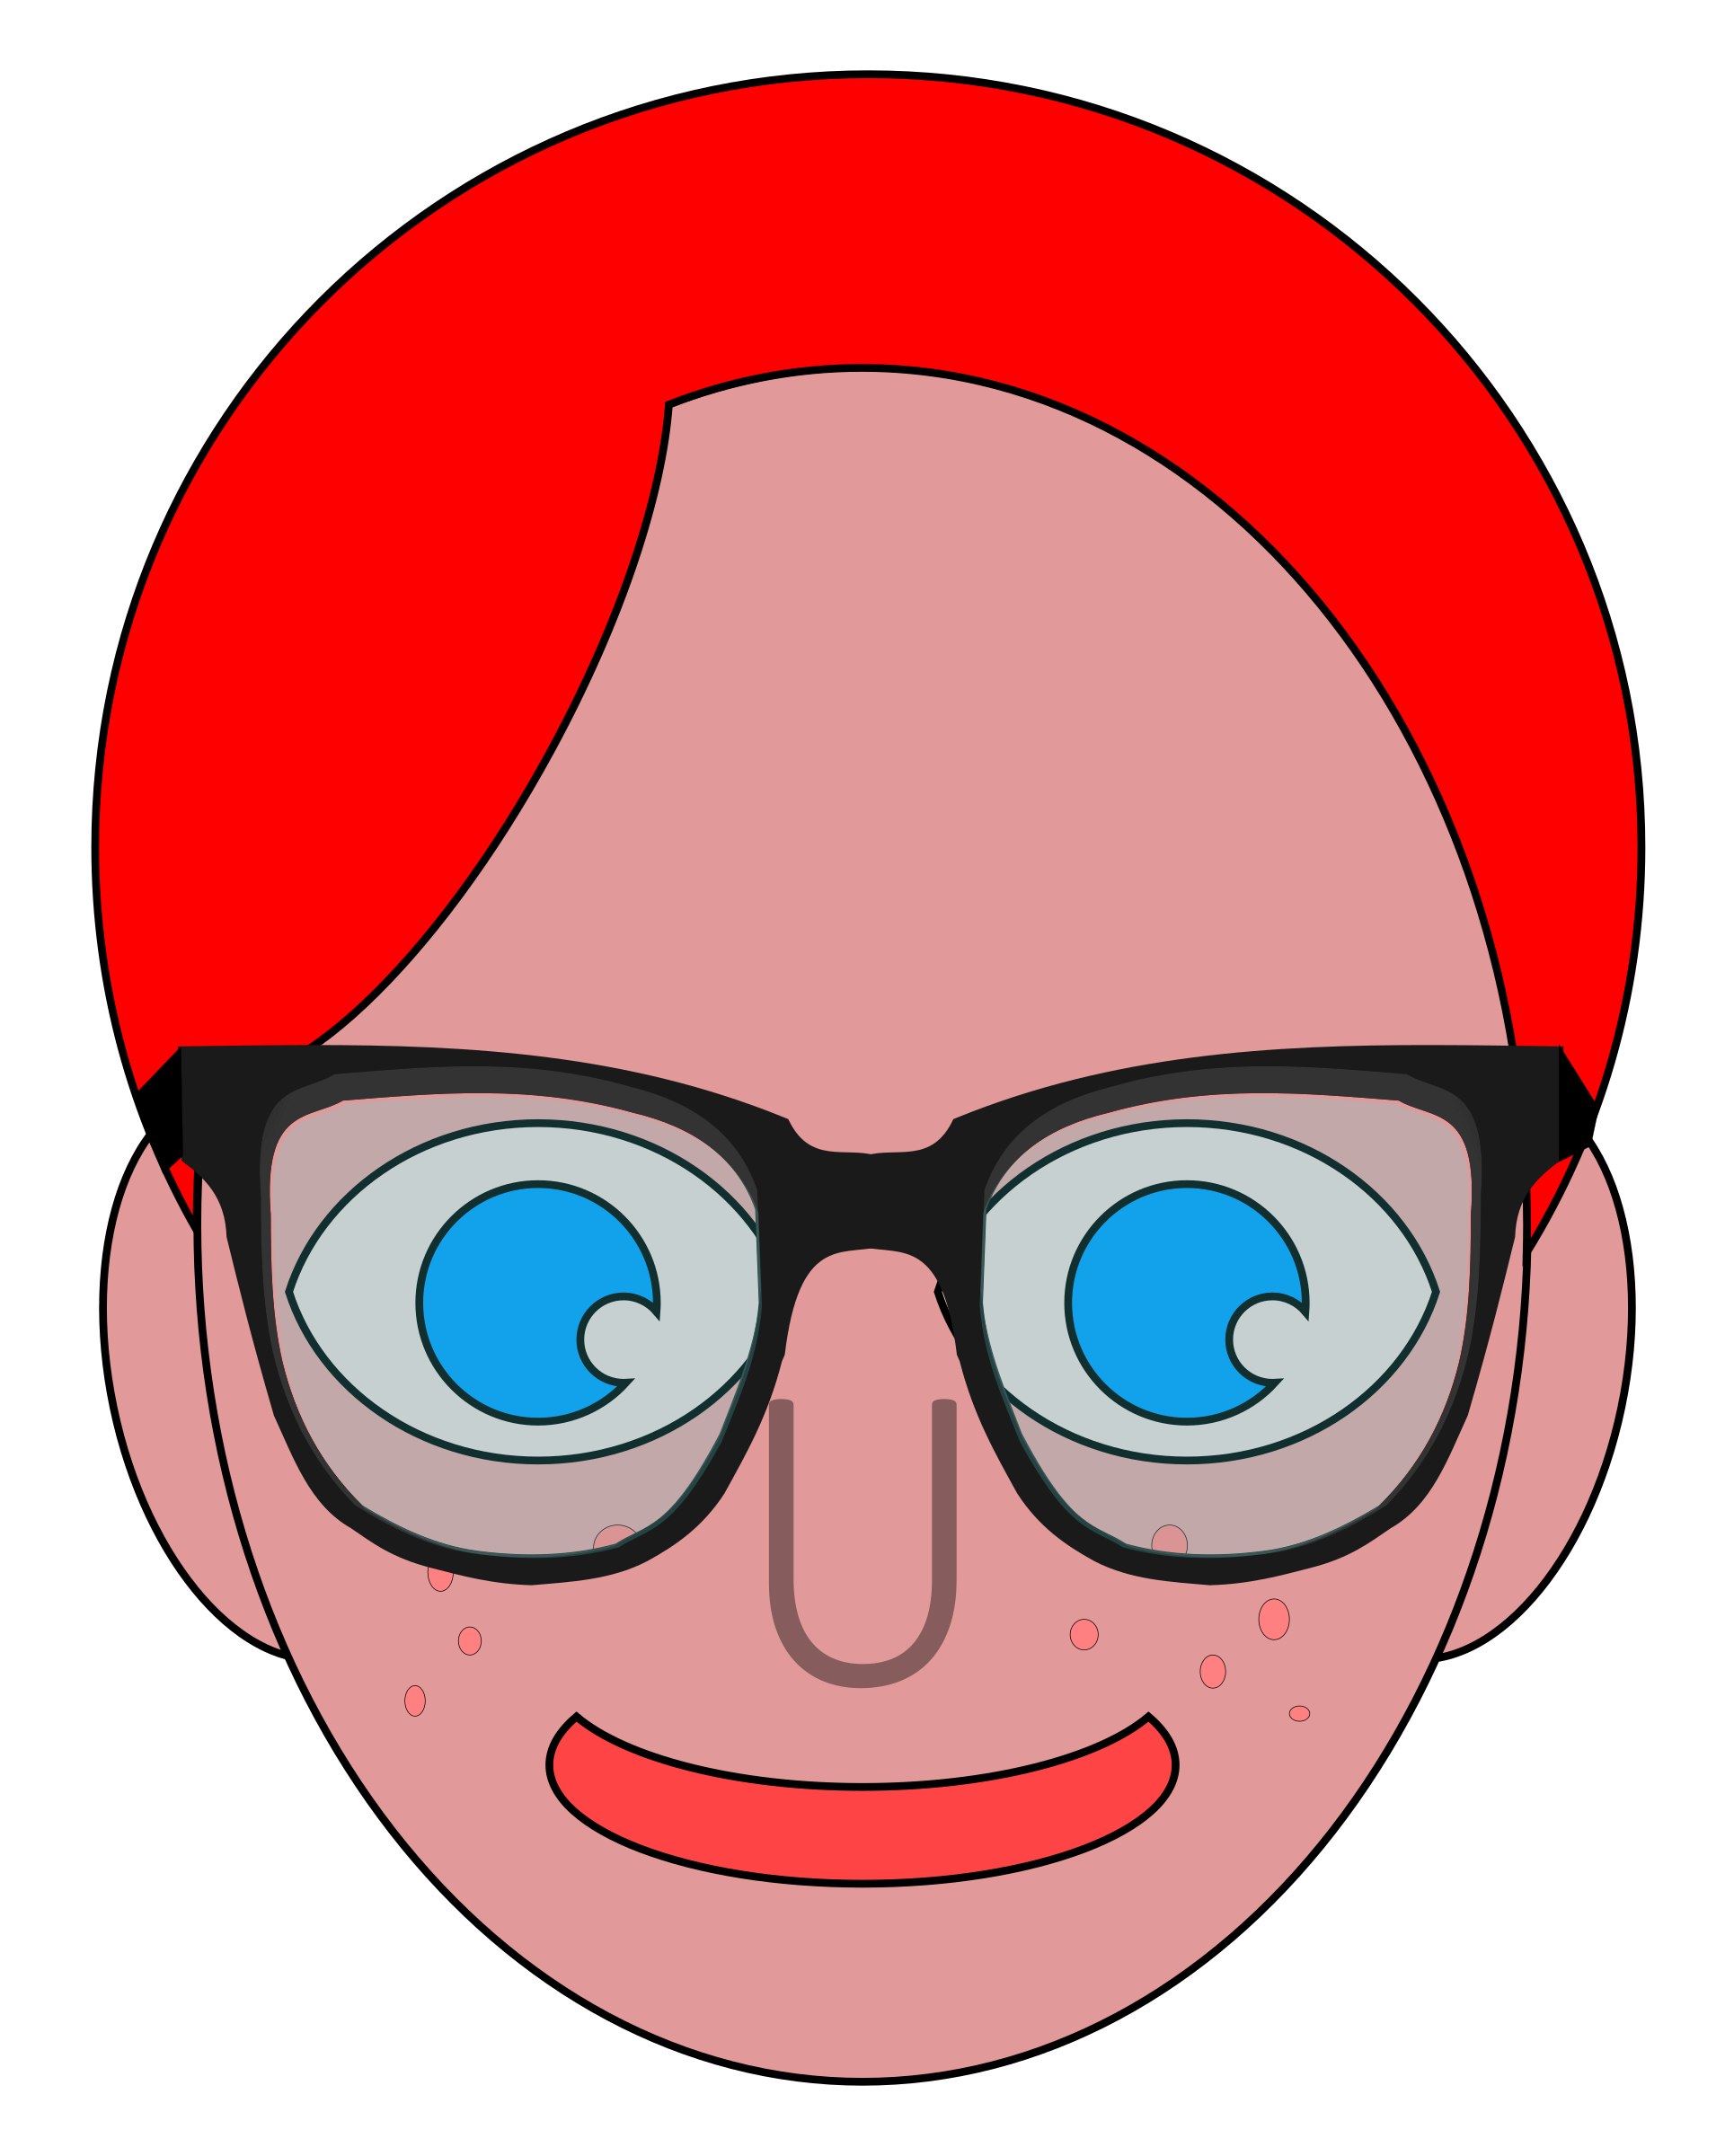 Nerd with glasses big. February clipart nerdy